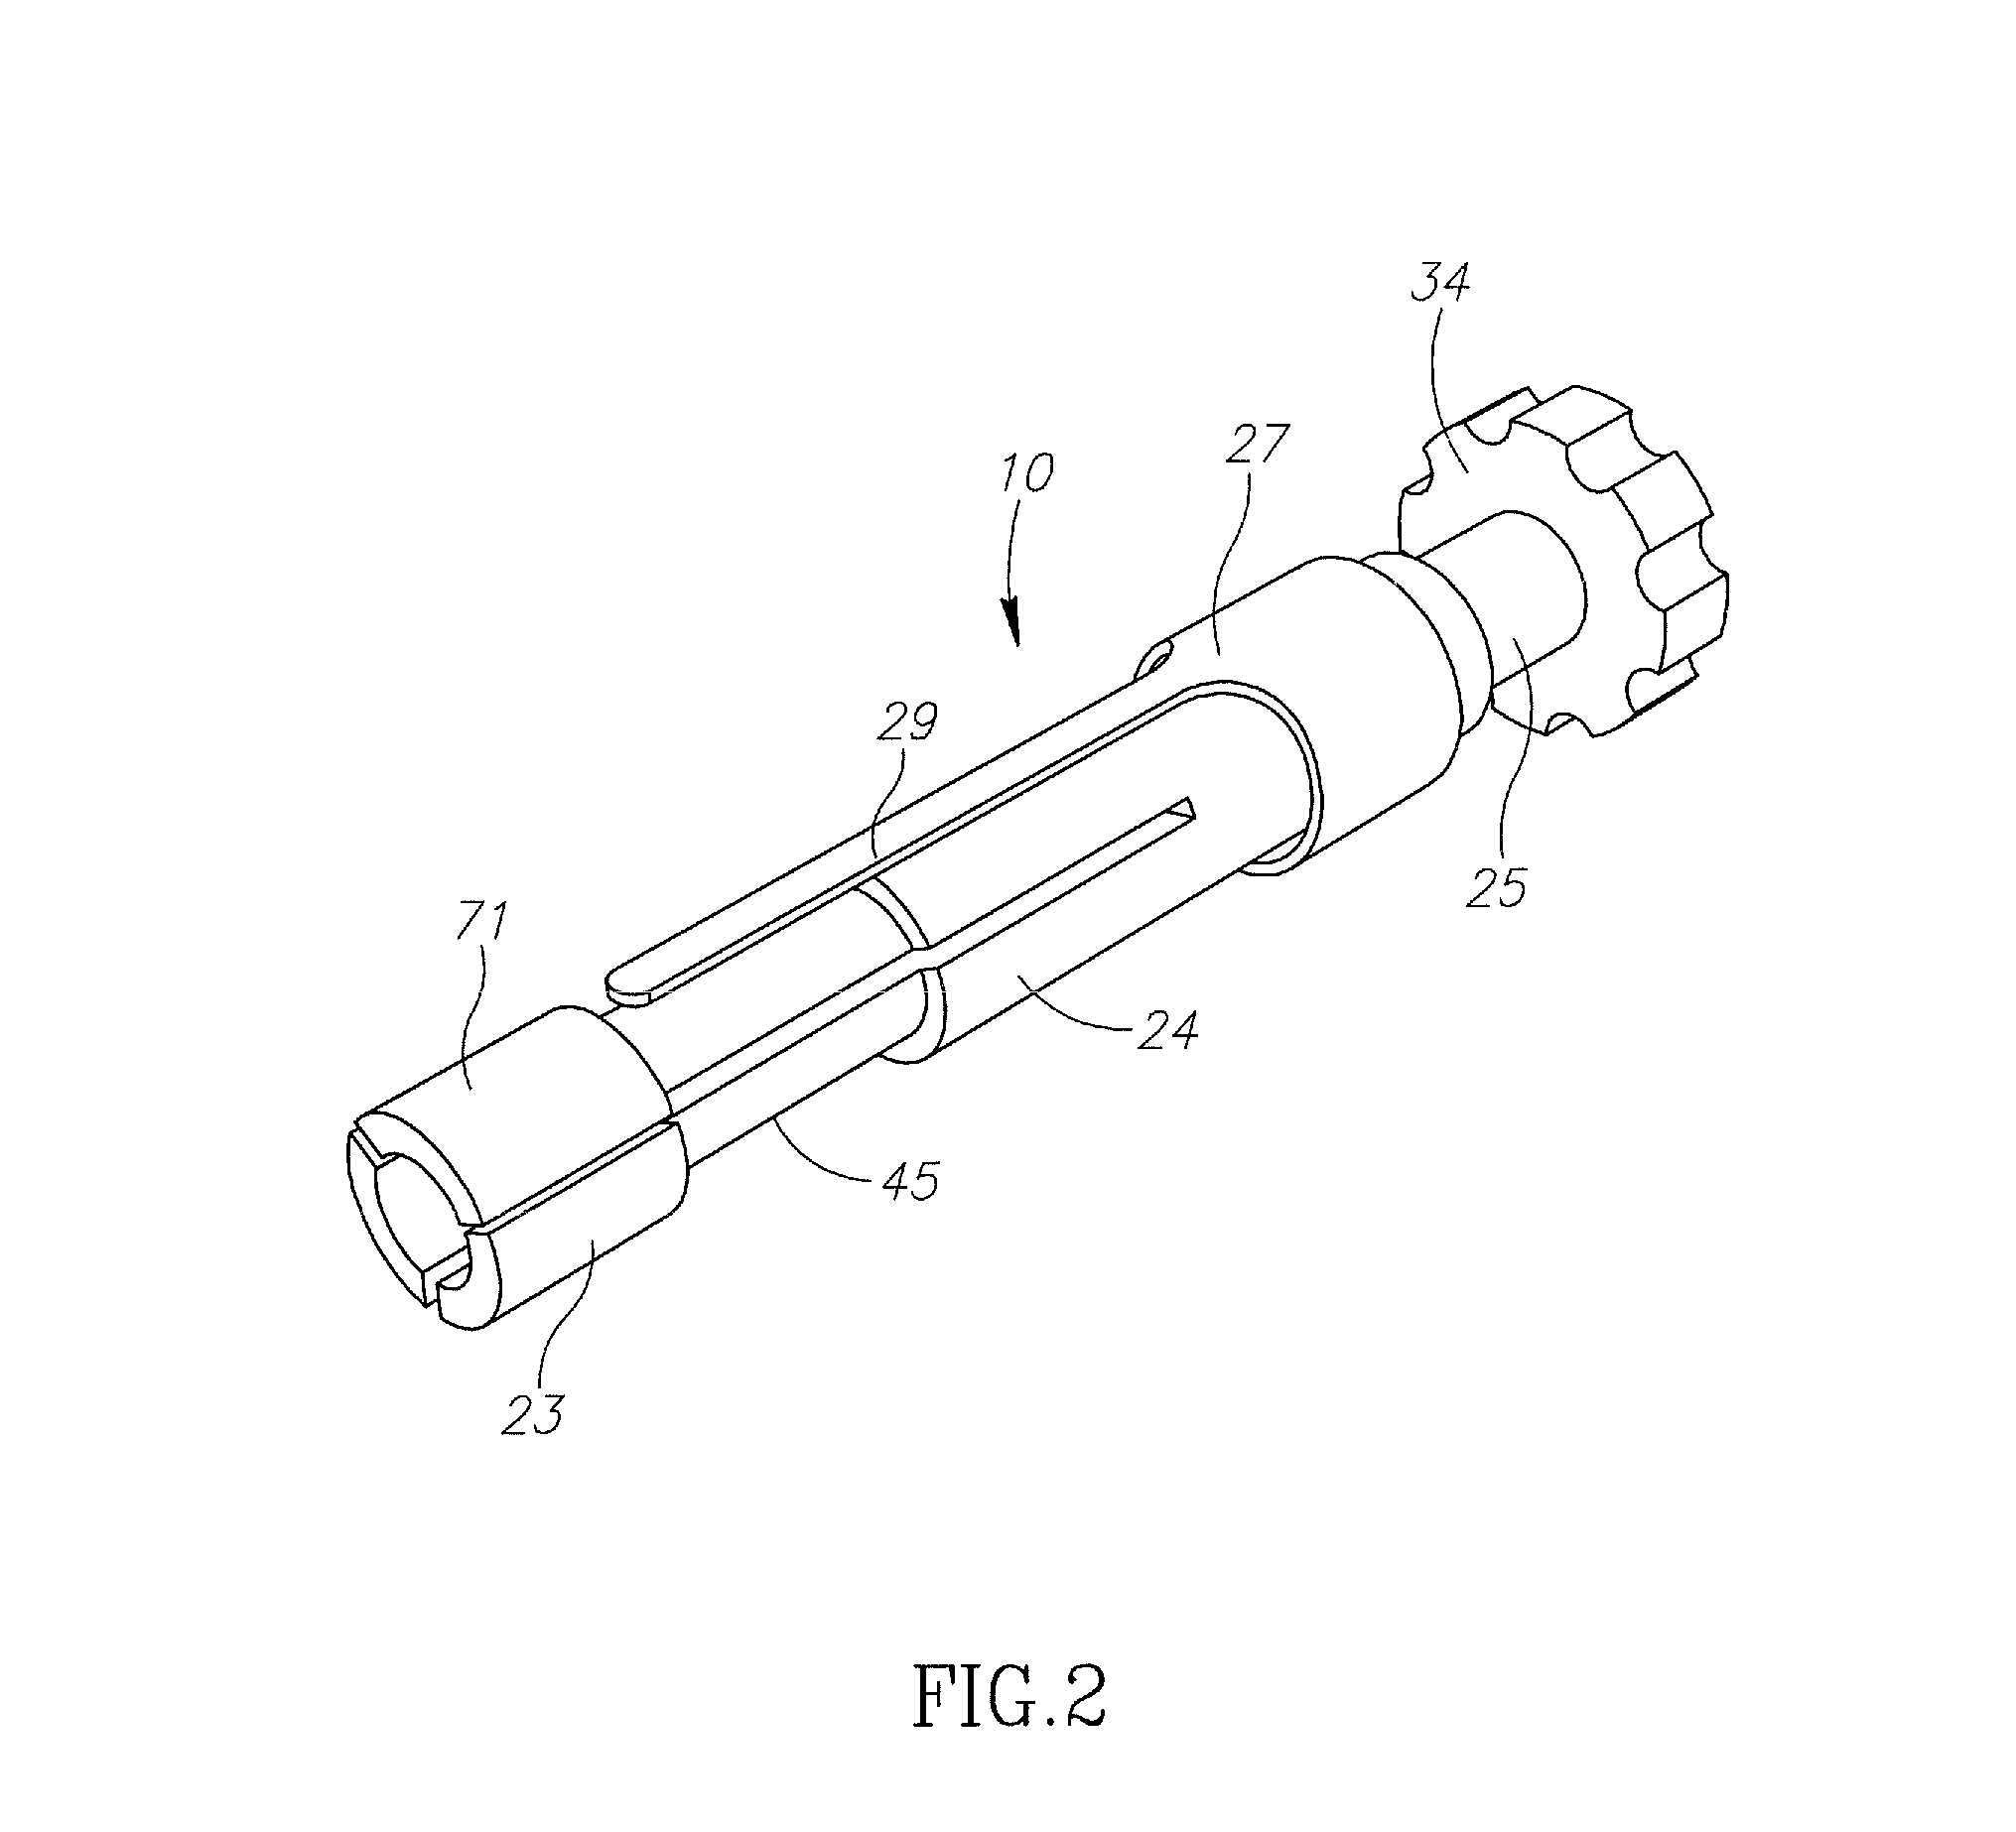 Device for preparing tissue for anastomosis